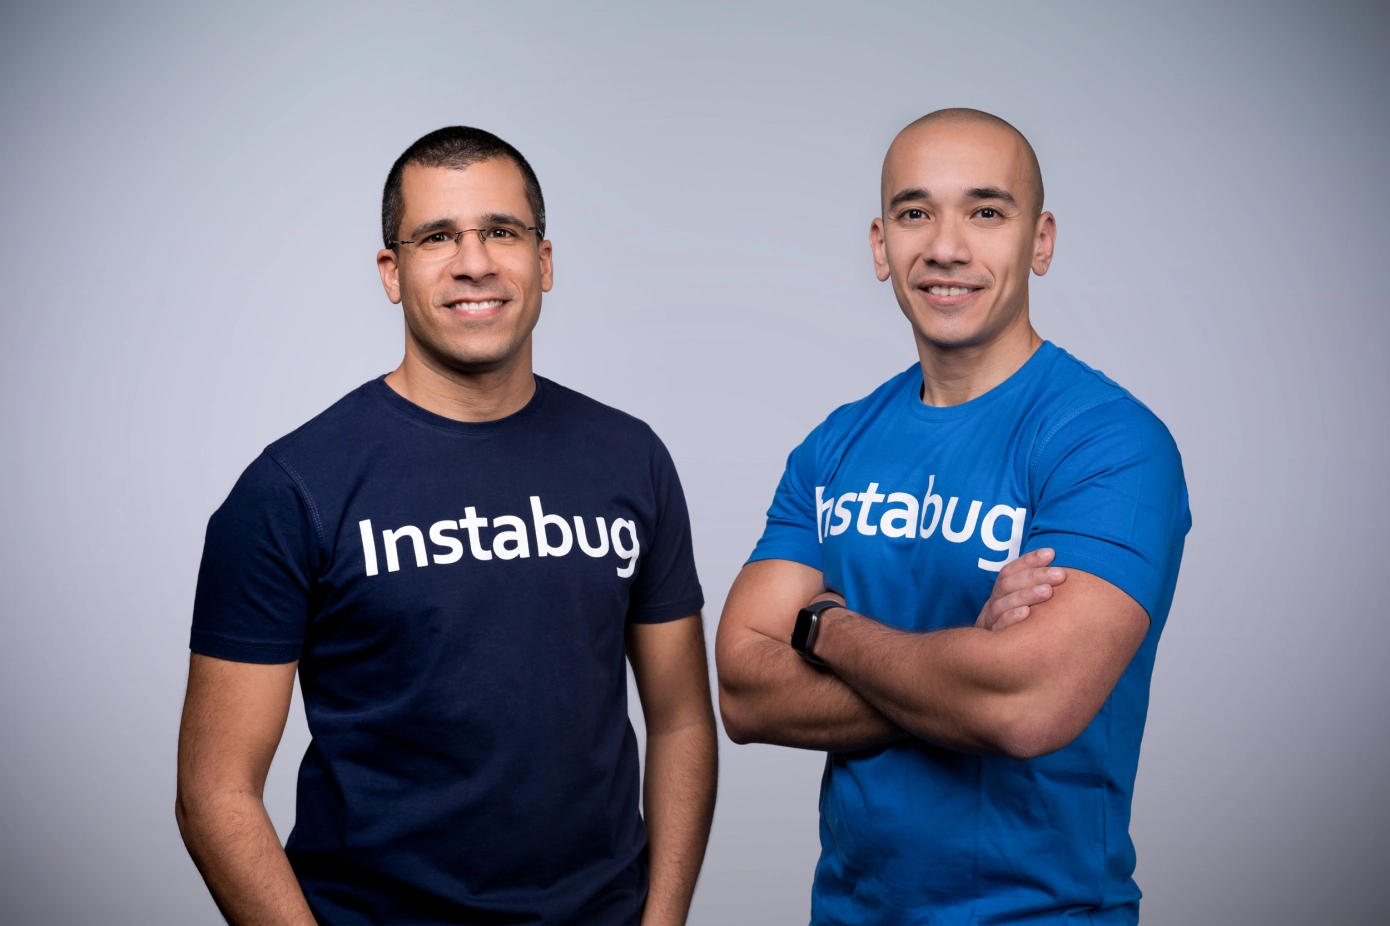 founders of Instabug